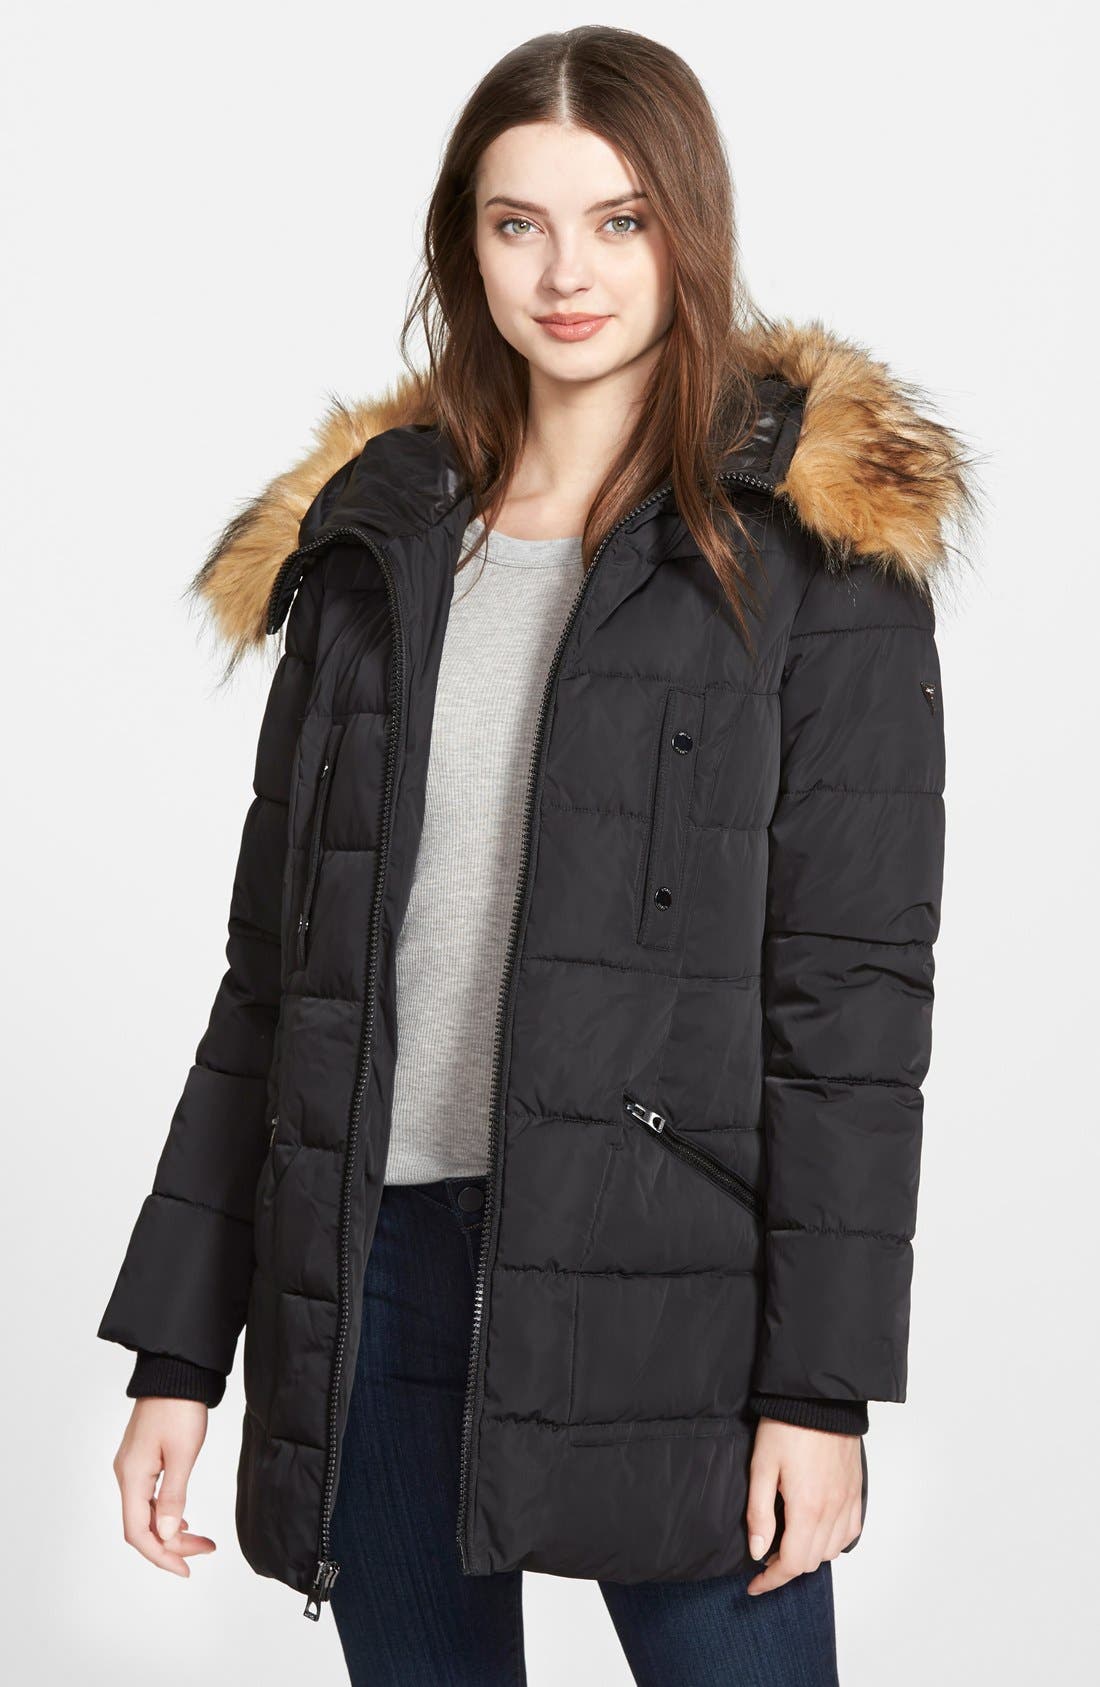 guess faux fur hooded anorak jacket